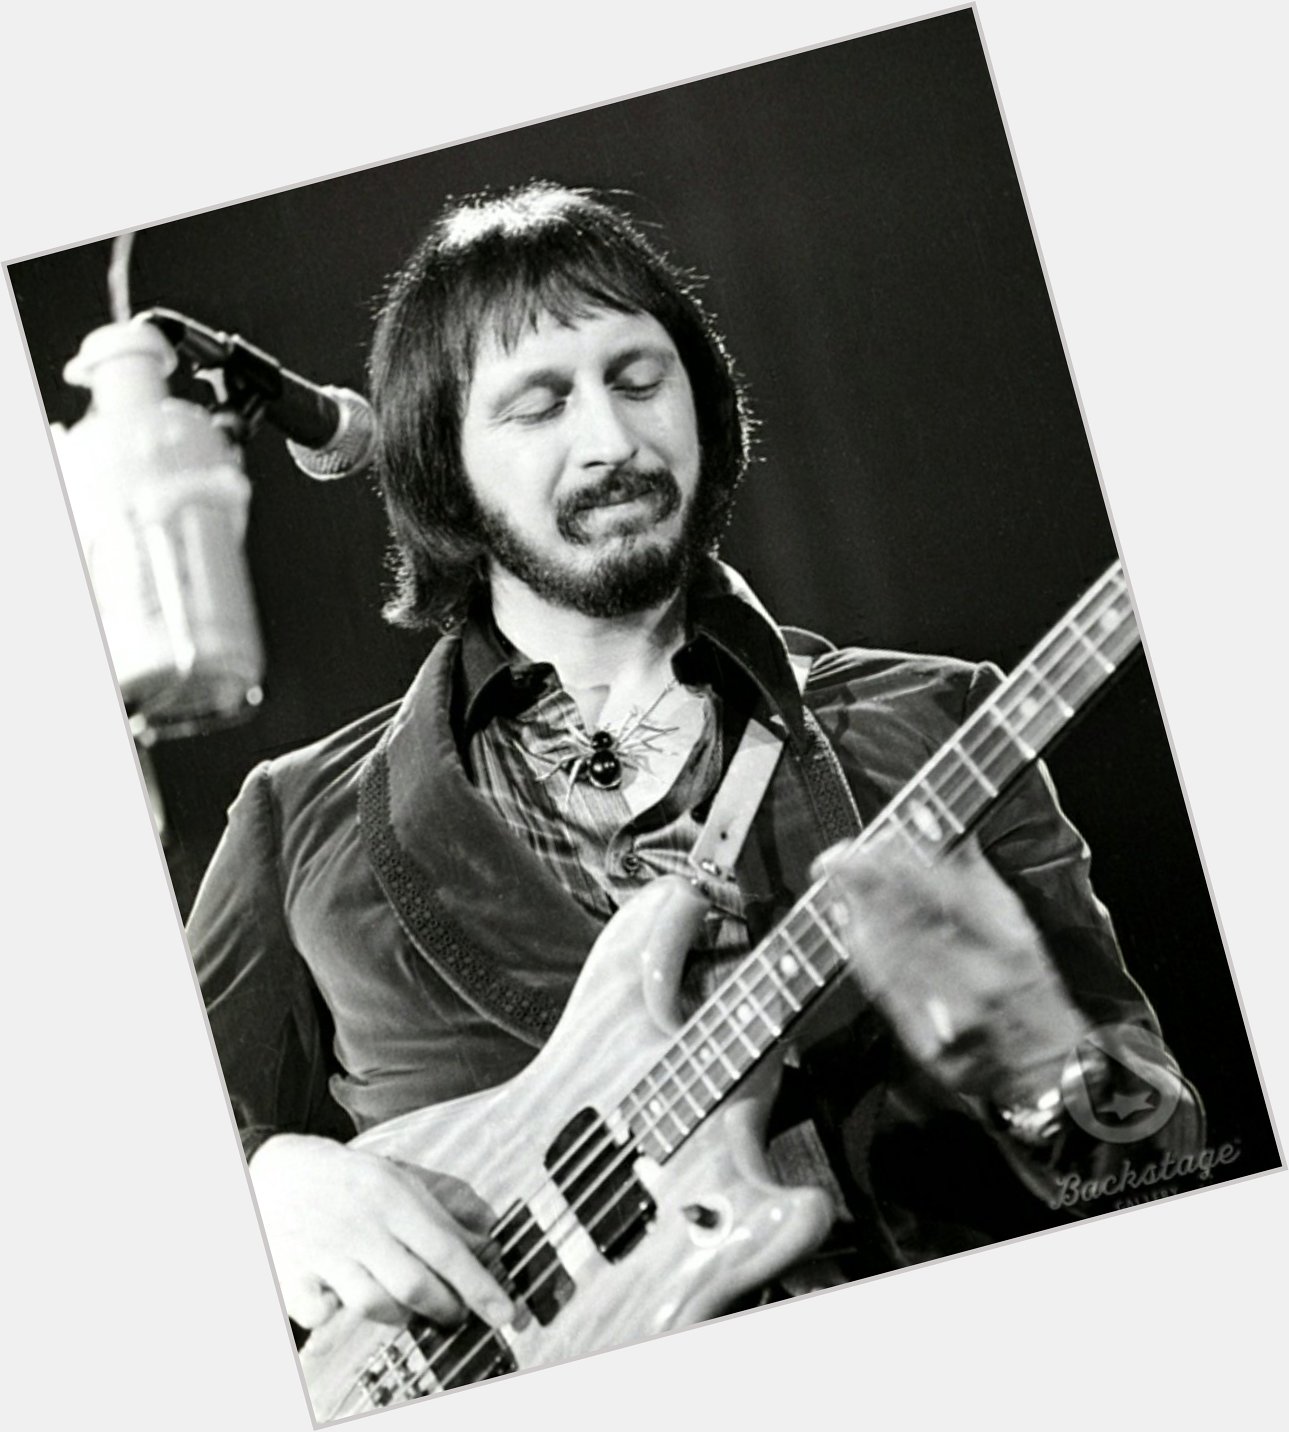 Also happy birthday to John Entwistle! One of the greatest bassists of all time. He would\ve turned 73 today 